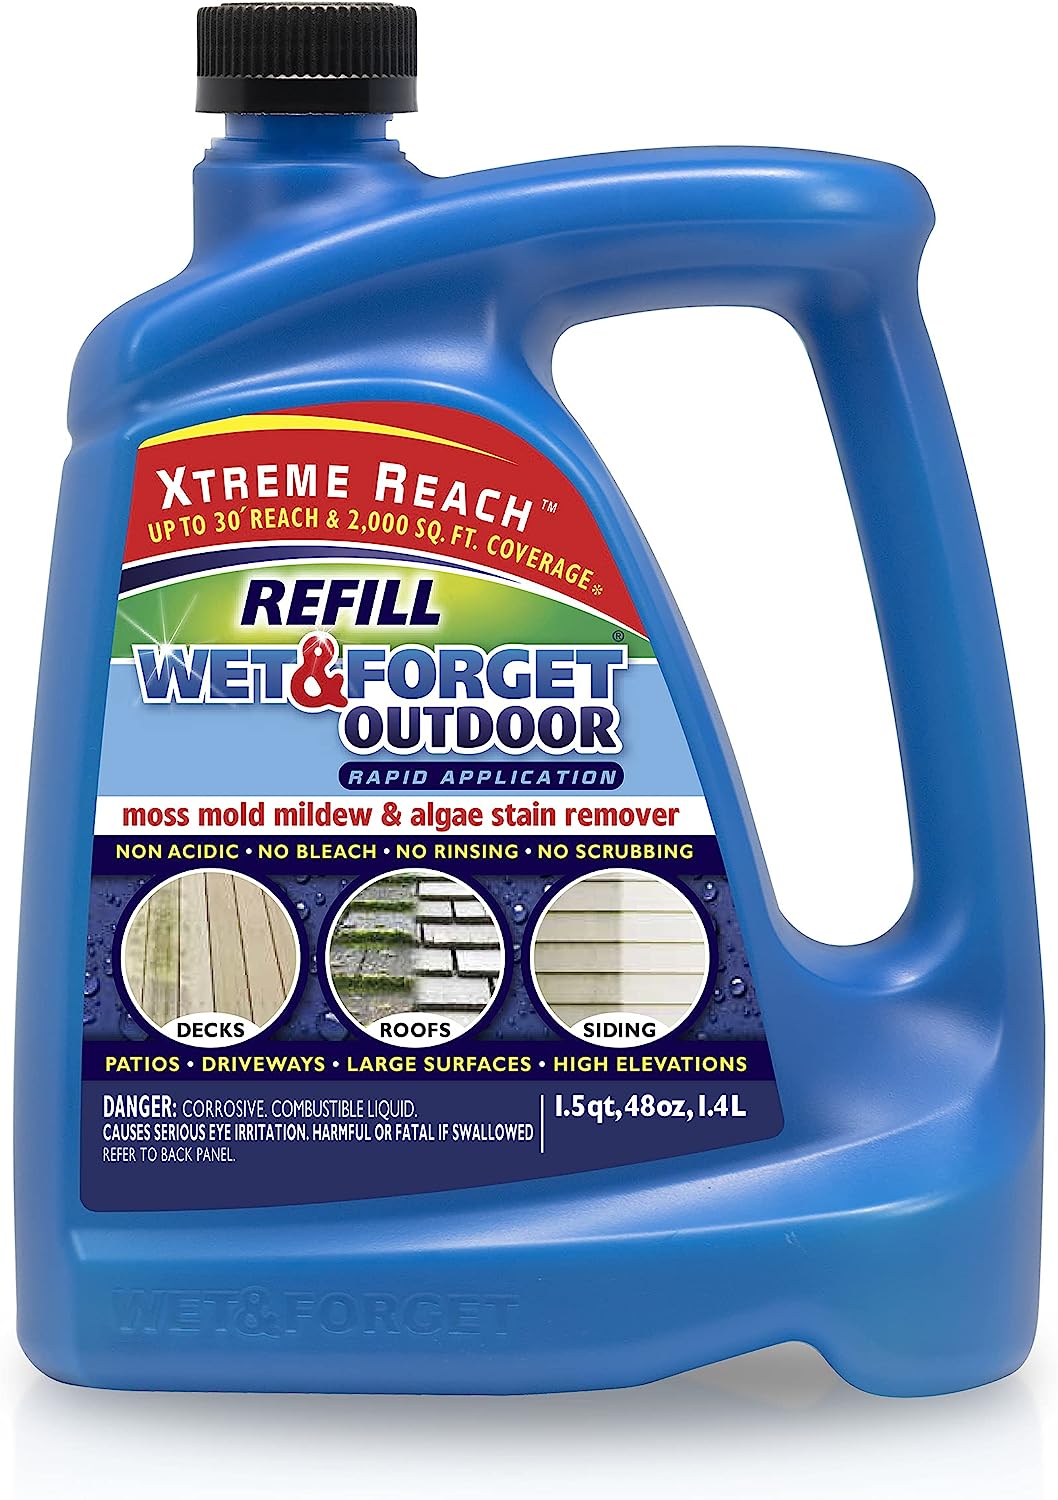 Wet & Forget Outdoor Moss, Mold, Mildew, & Algae Stain [...]